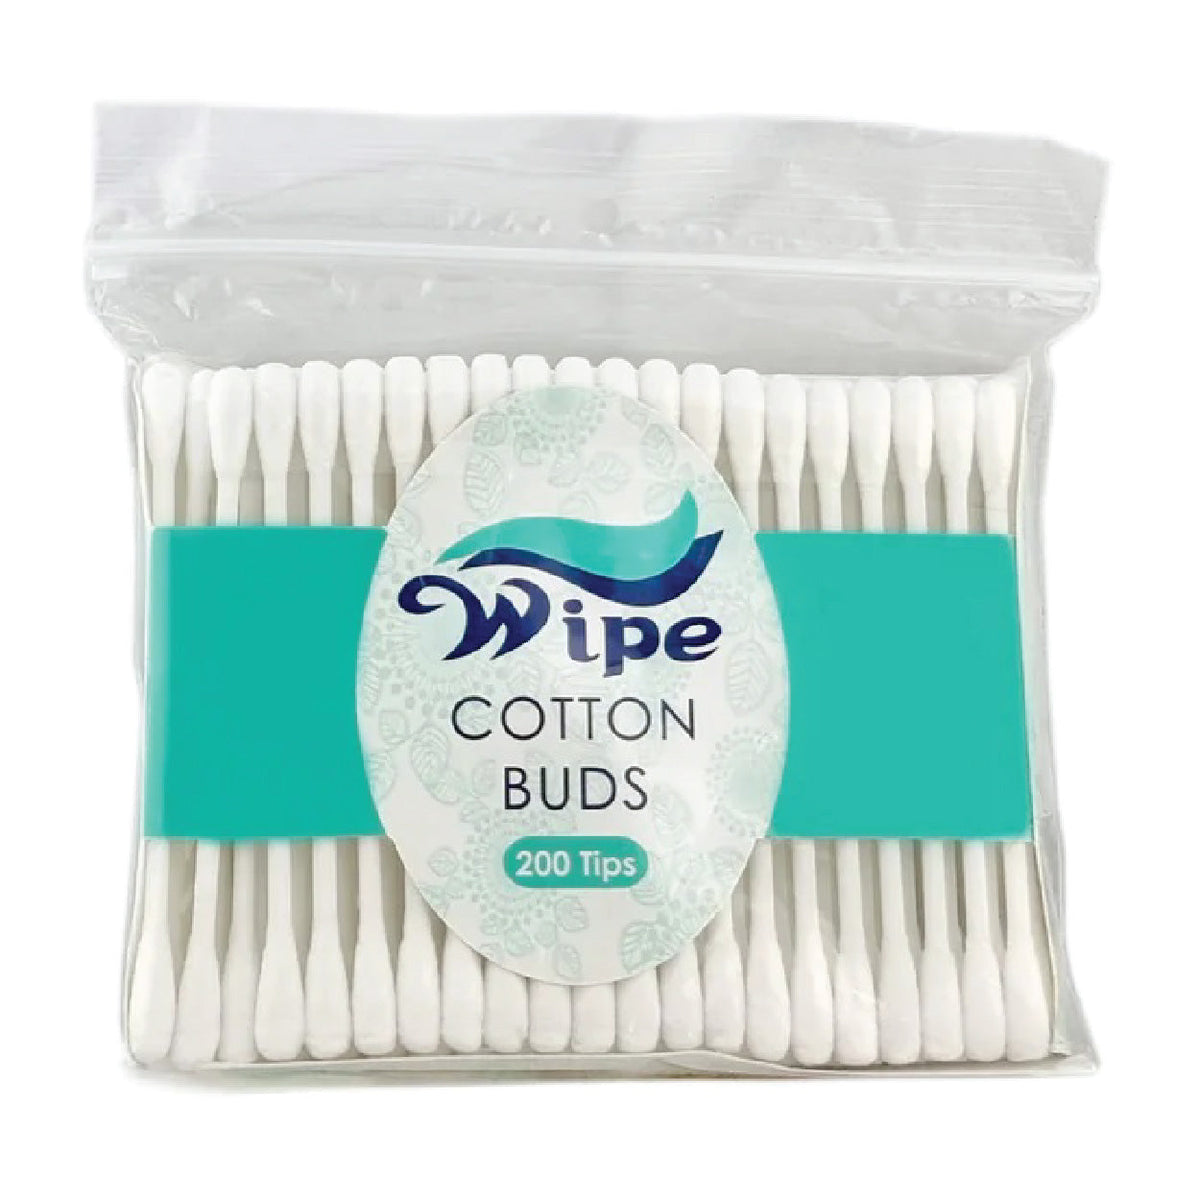 Wipe Cotton Buds 200 tips